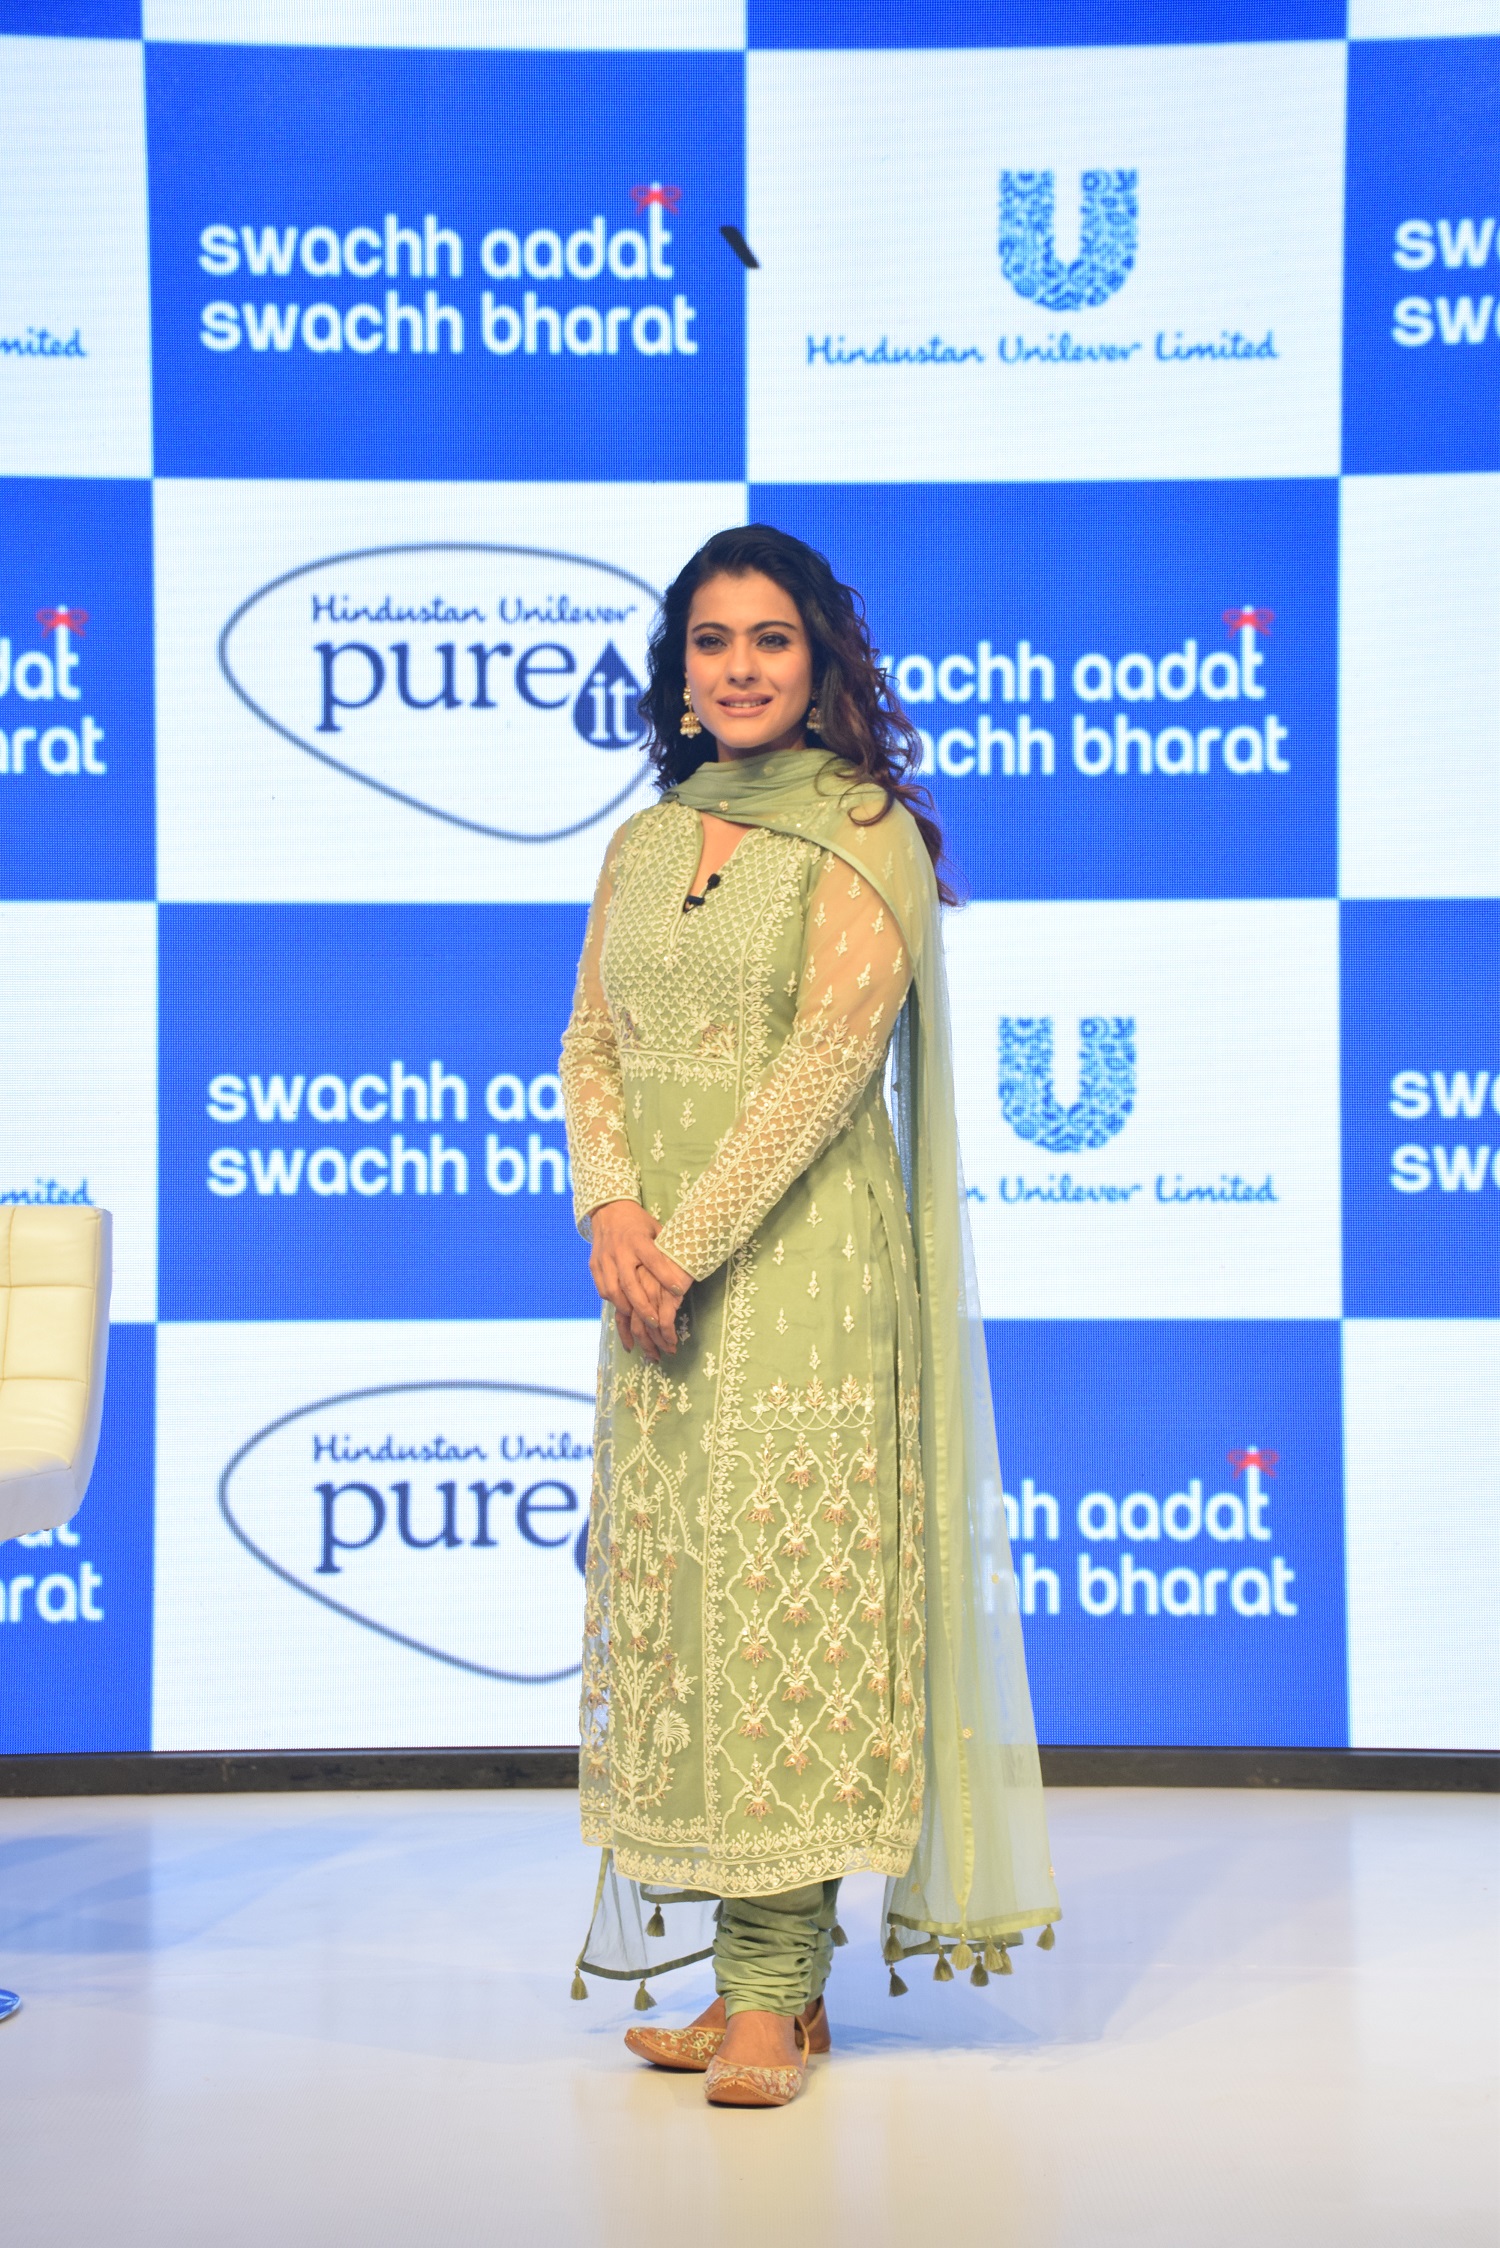   Swachh Aadat Swachh Bharat Advocacy Amabassador Kajol at the launch of the 'Playing Billion' campaign / GPN